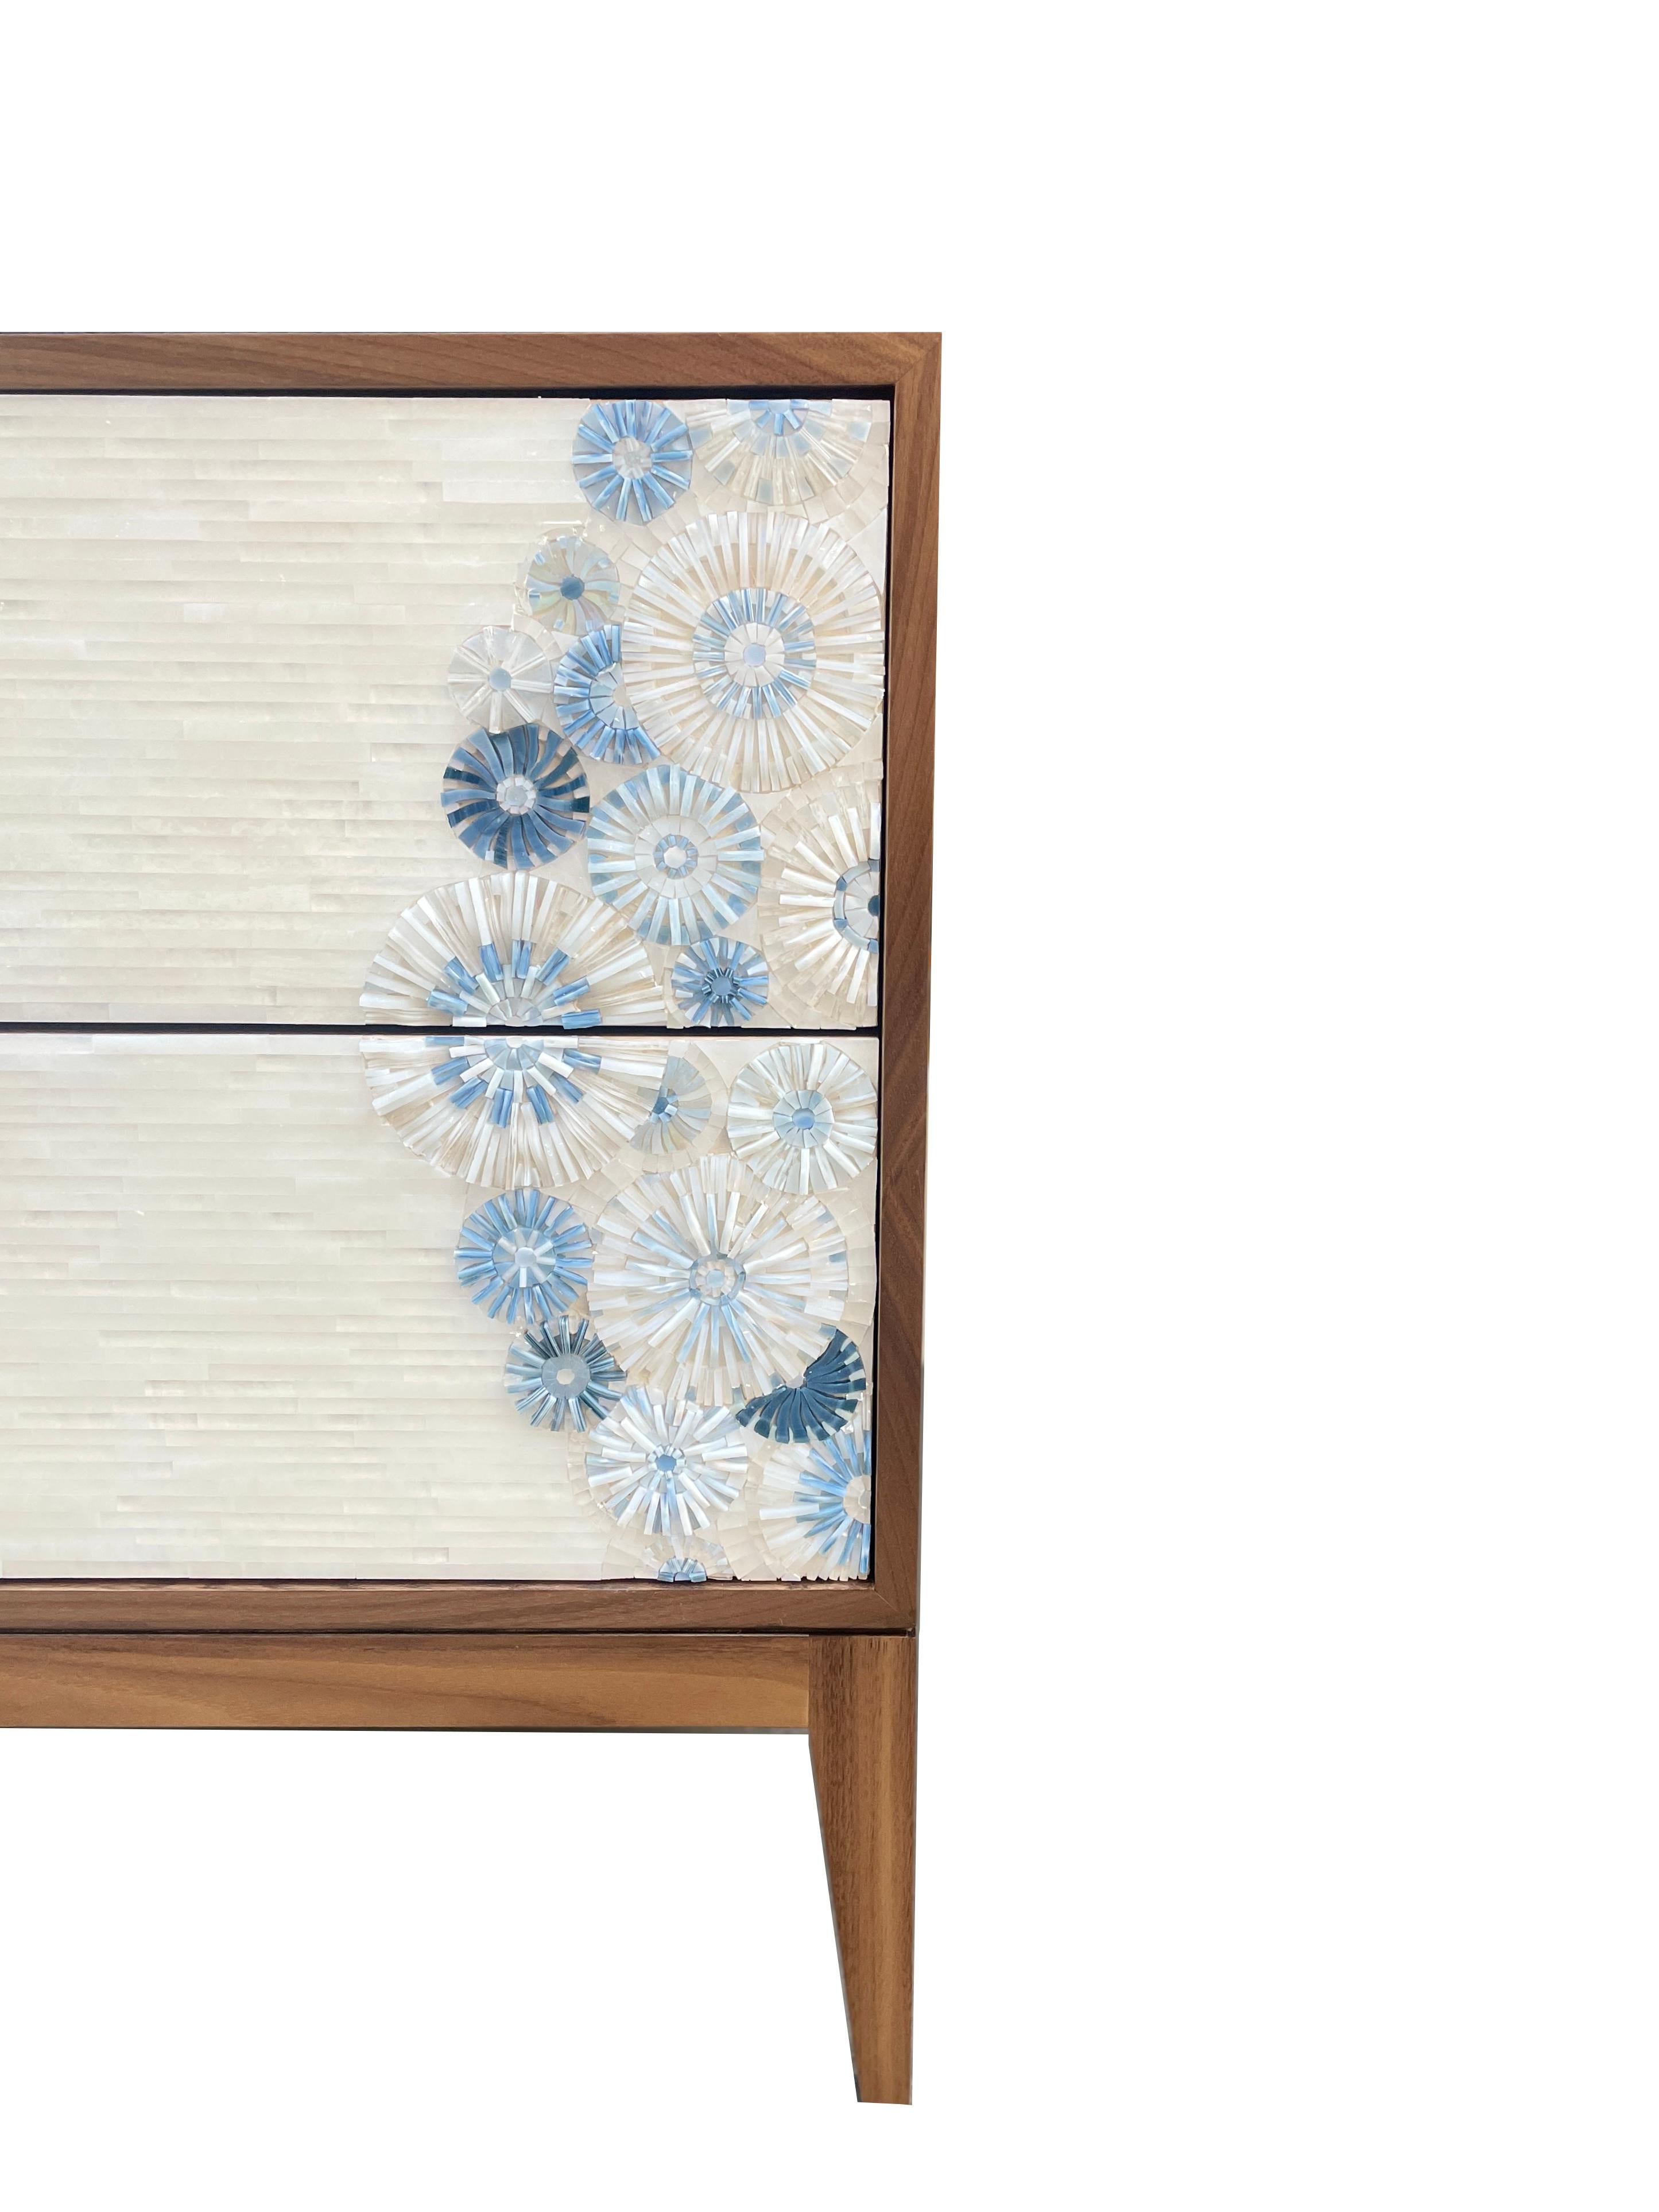 The Milano nightstand by Ercole Home has a 2-drawer front, with Walnut wood in a Natural Finish. Hand cut glass mosaics in Blossom Pattern in a mix of blue colors decorate the surface along with a horizontal field of white glass stripe pattern.